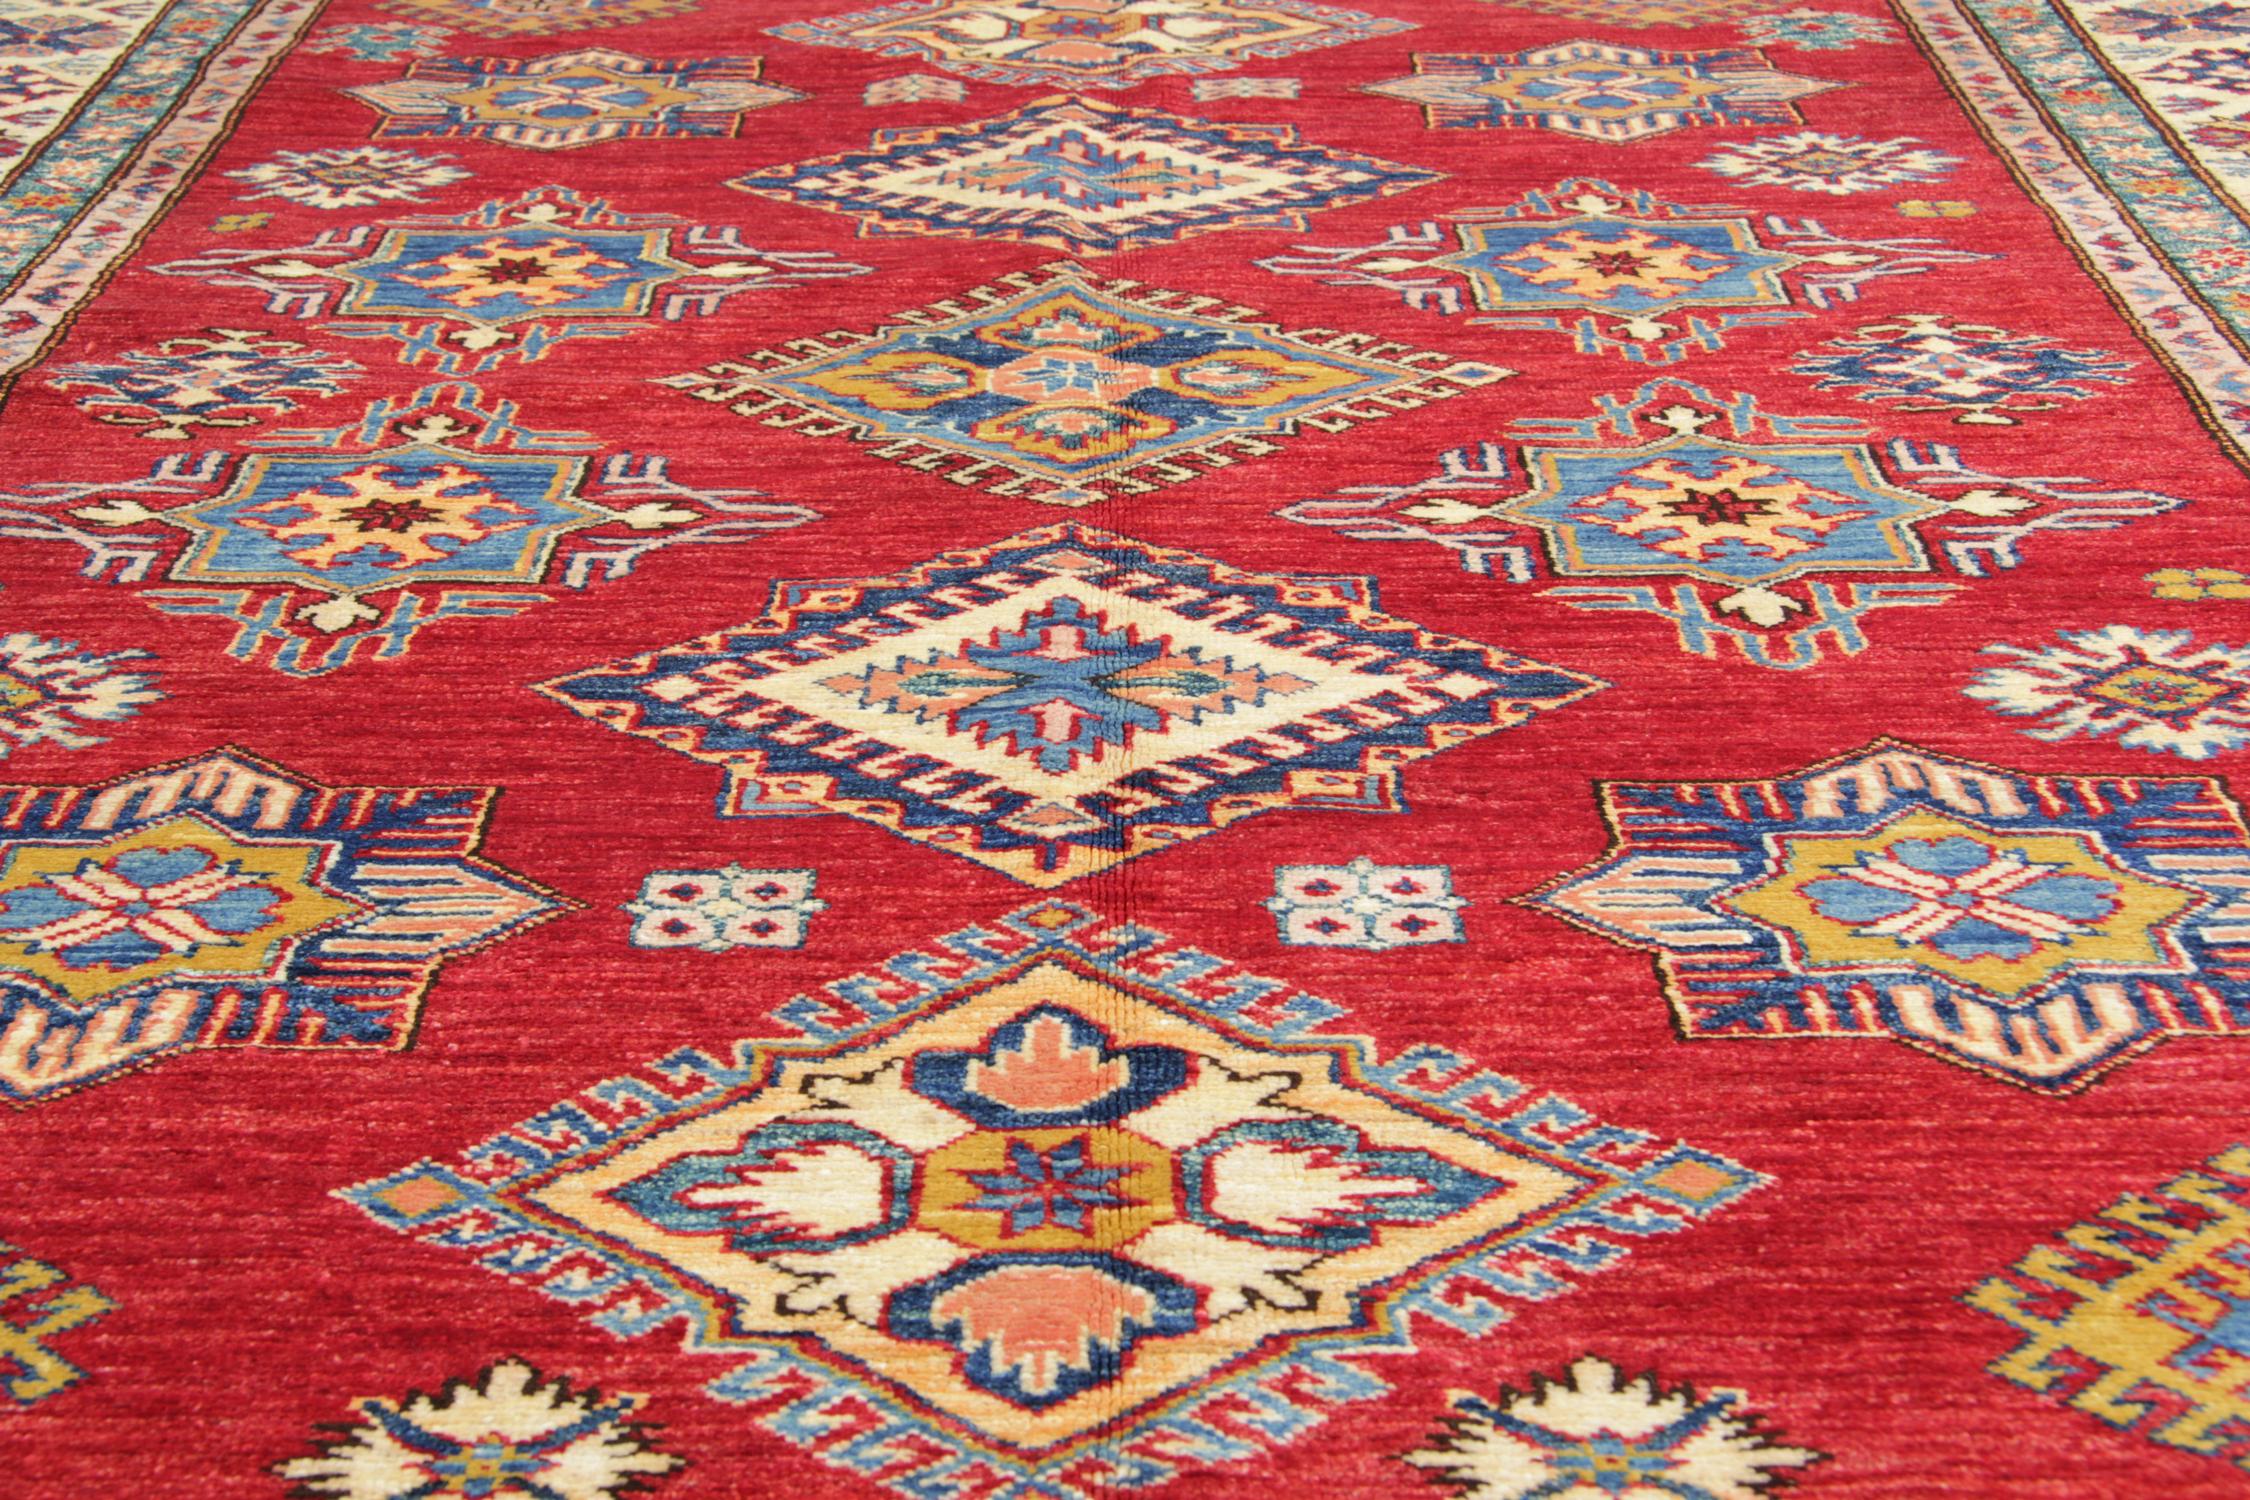 Vegetable Dyed Red Oriental Geometric Rugs, Handmade Carpet Ivory Rugs for Sale For Sale